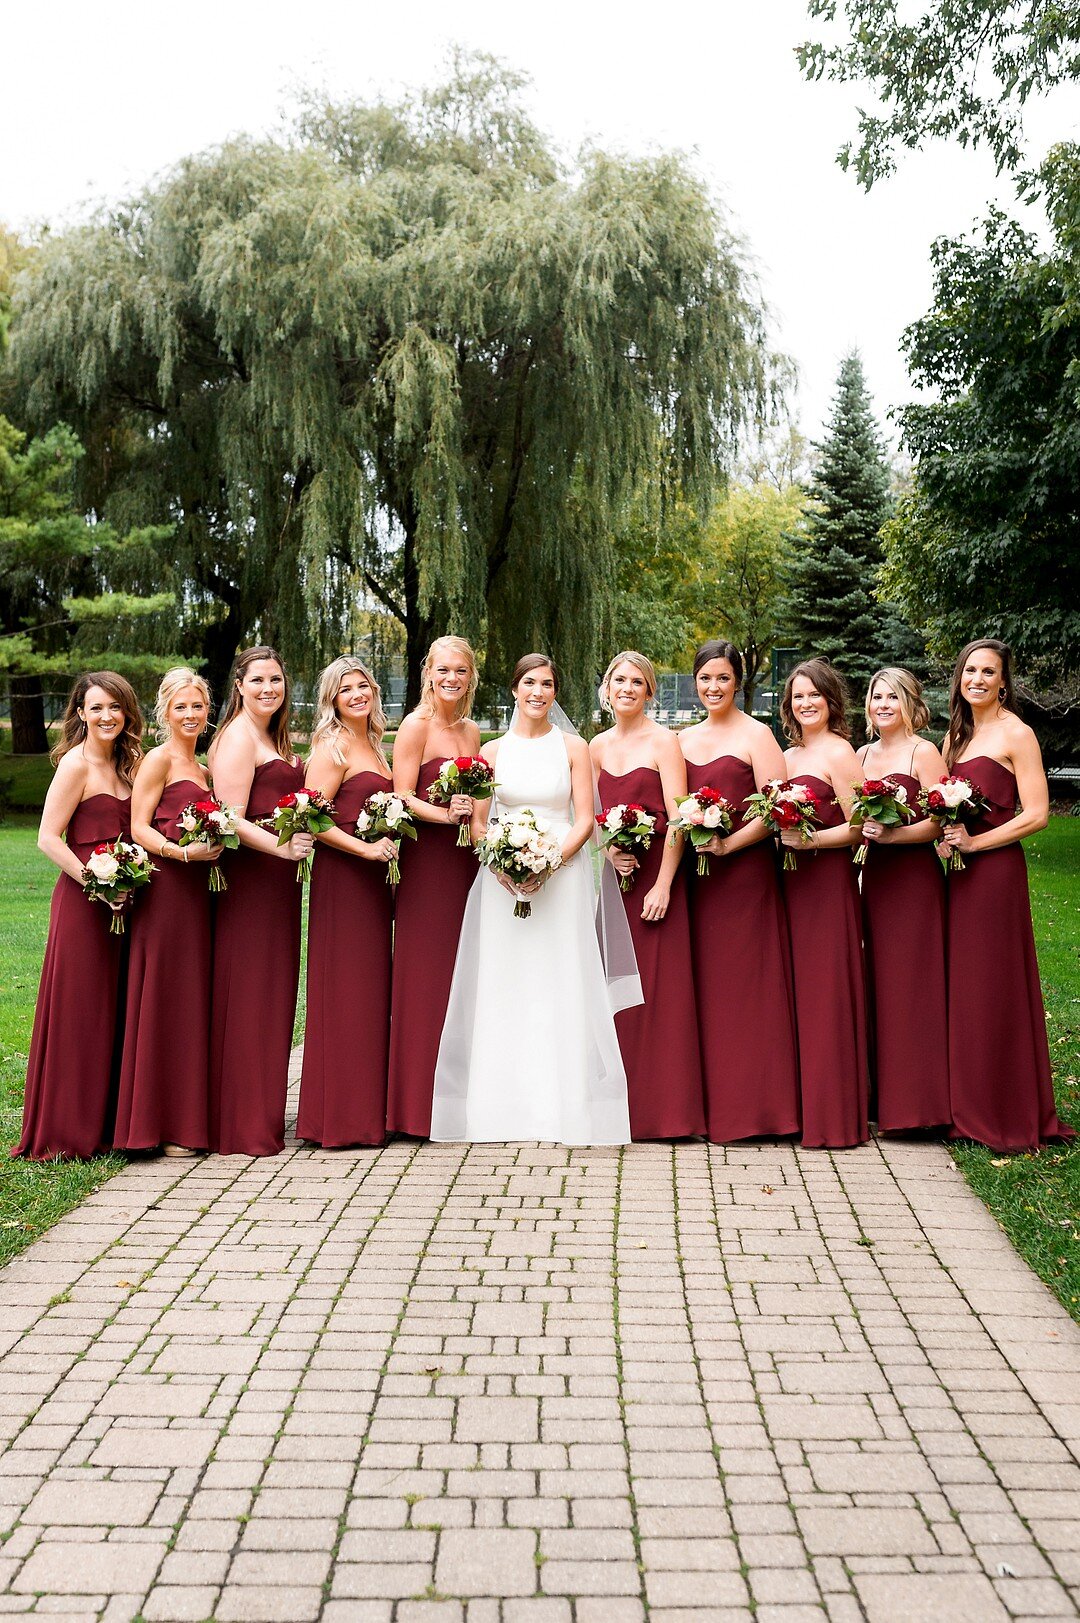 Classic and Romantic Chicago Wedding with Pops of Burgundy captured by Julia Franzosa Photography. See more timeless wedding ideas at CHItheeWED.com!